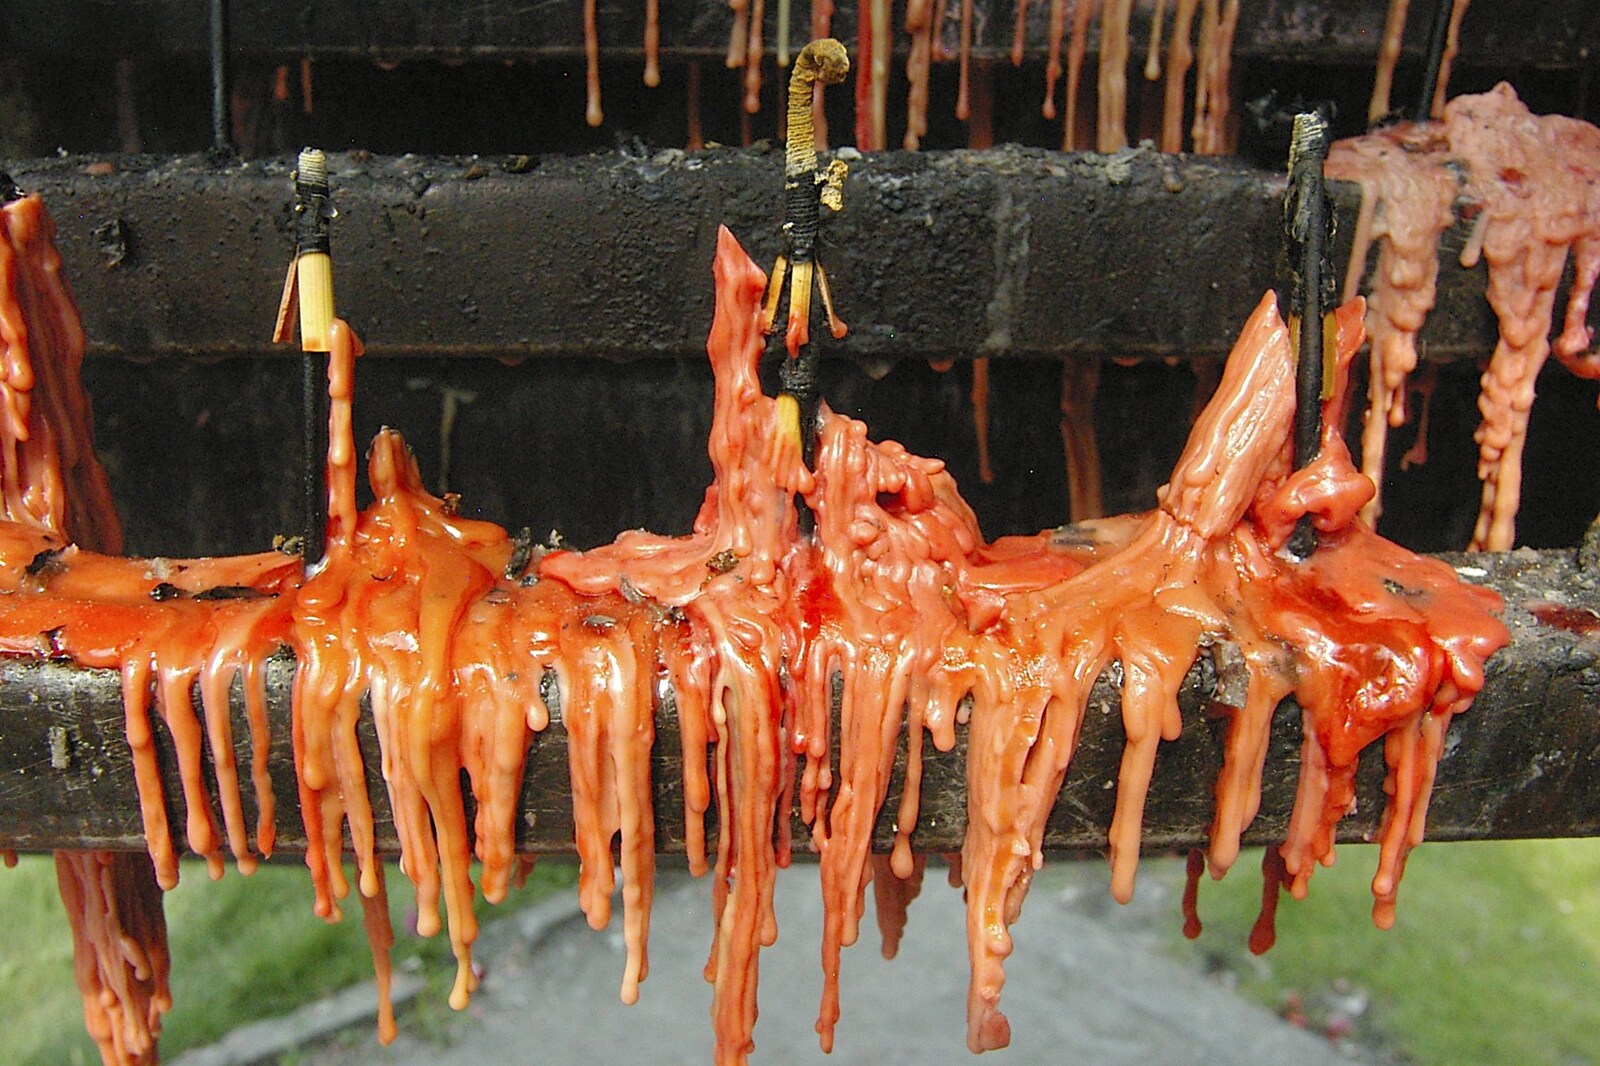 Solidified molten wax from a thousand candles from A Few Days in Nanjing, Jiangsu Province, China - 7th October 2006